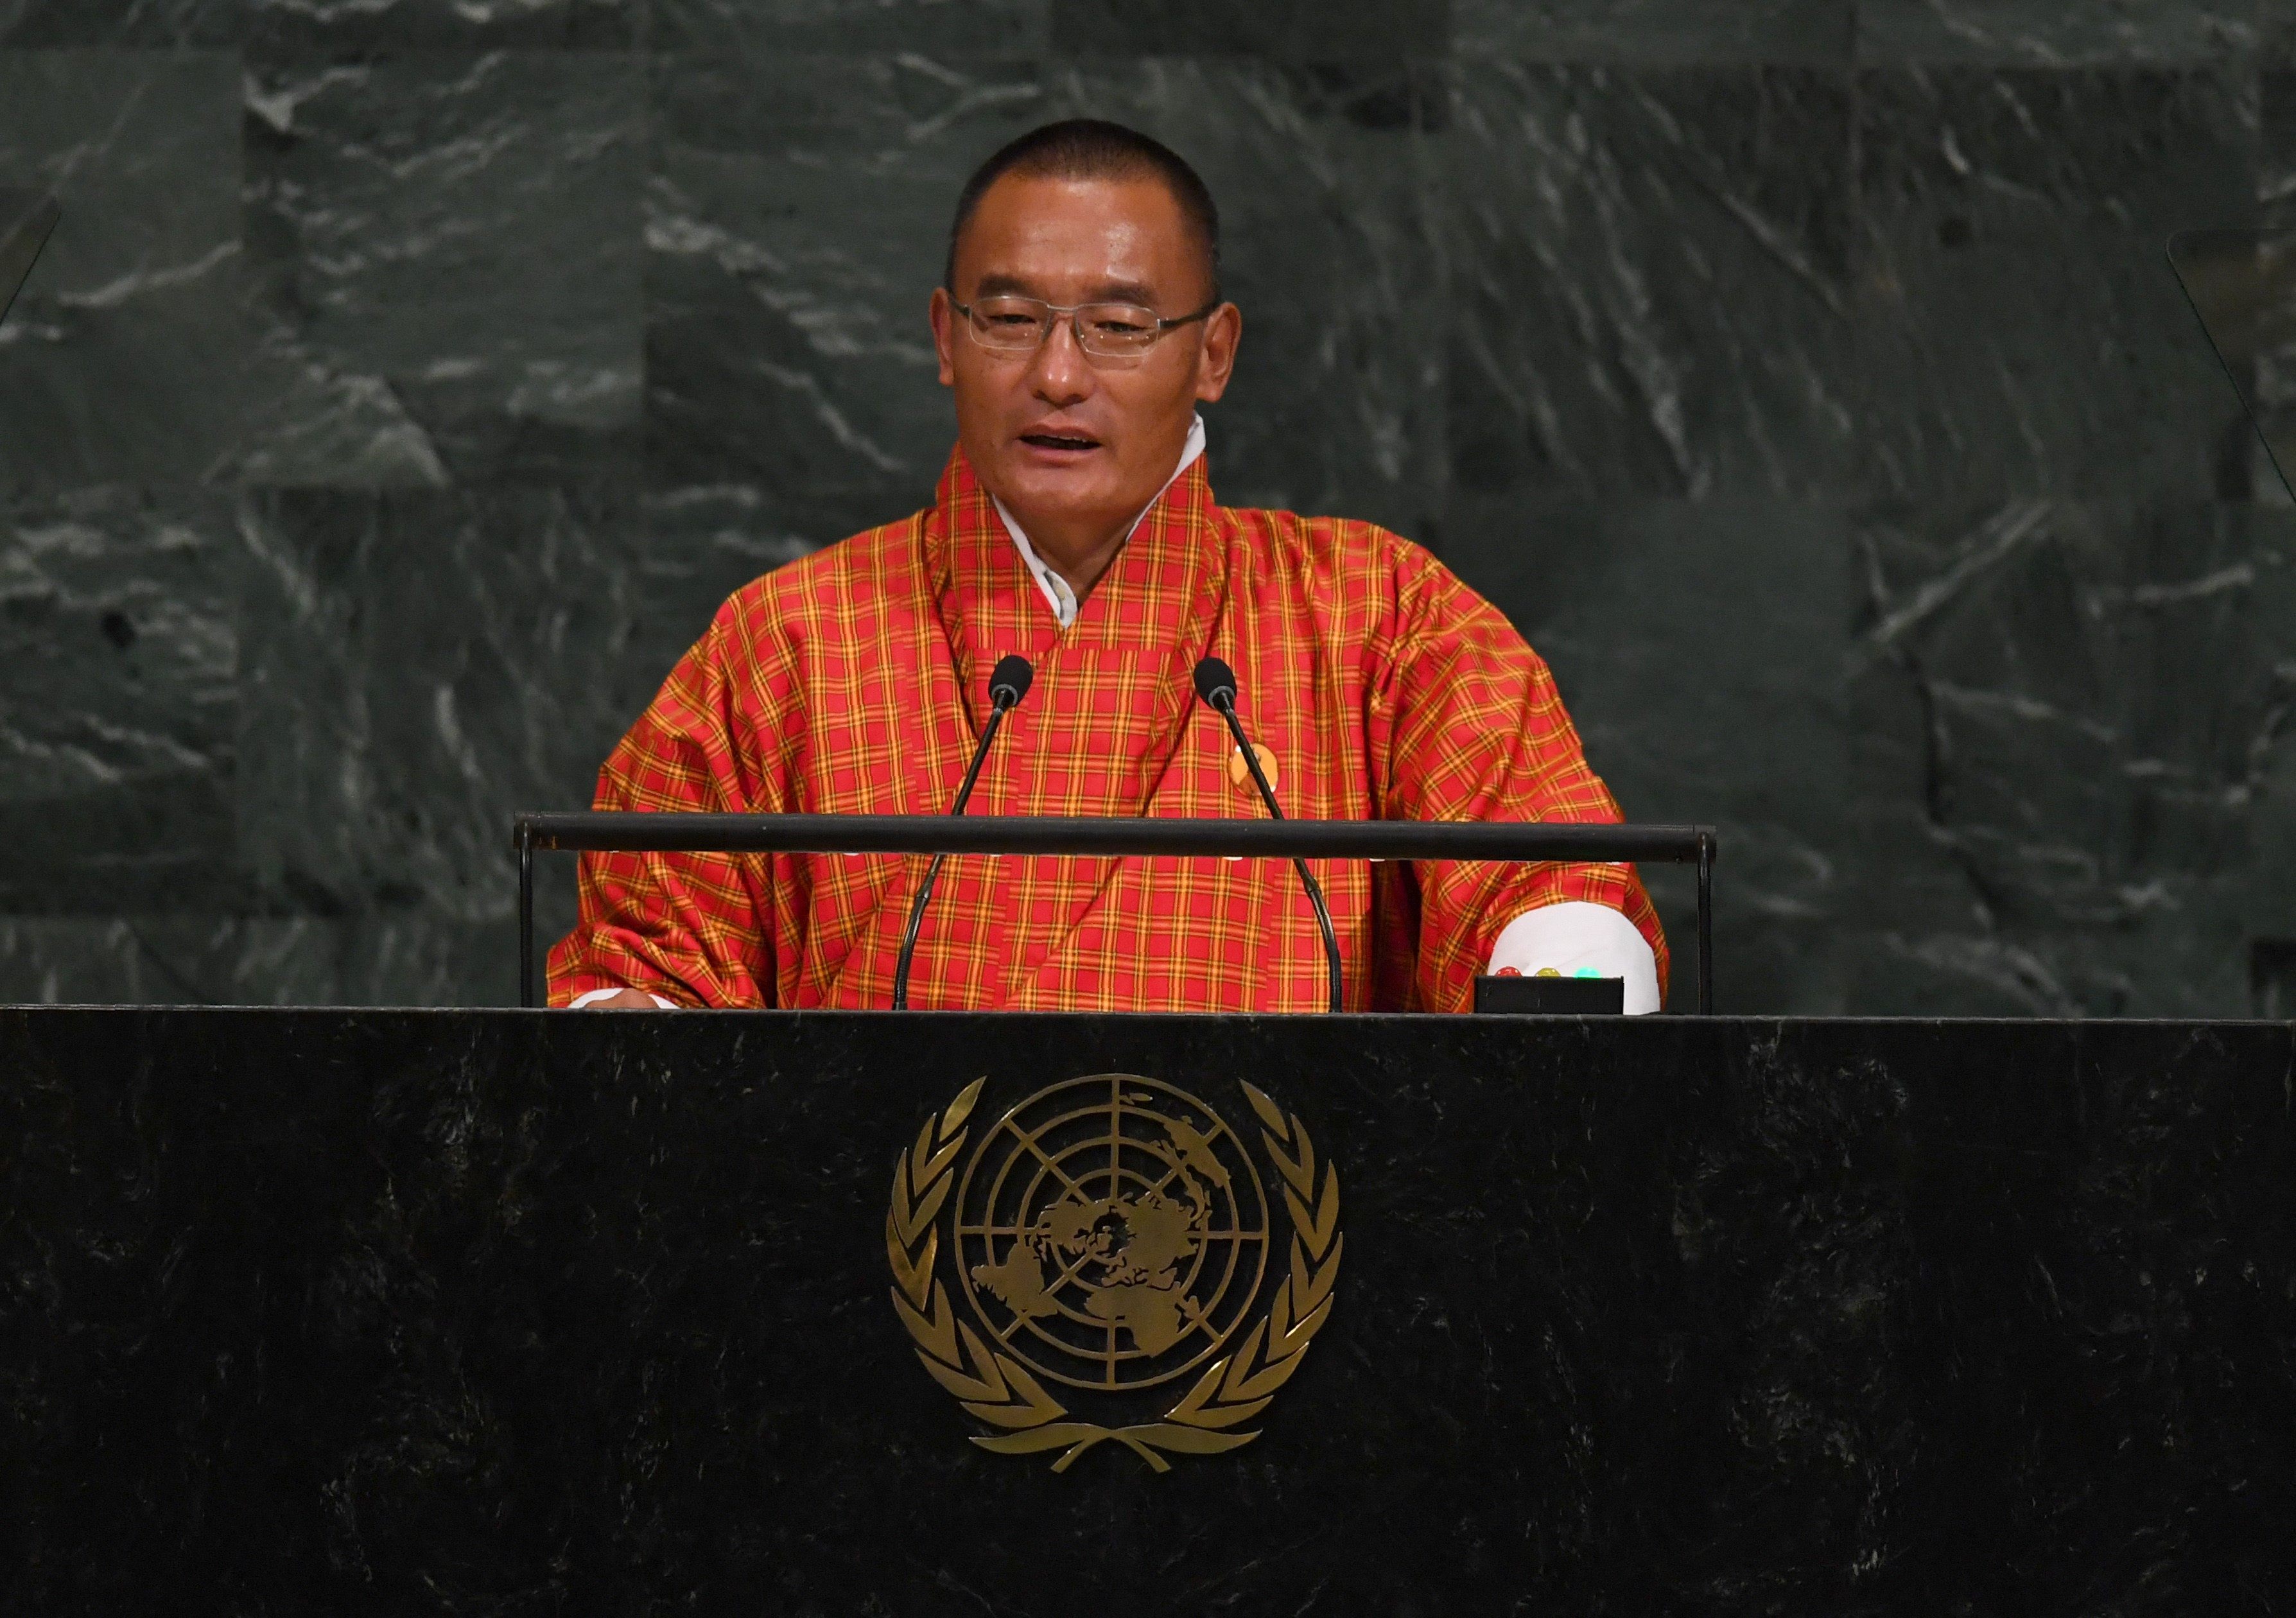 Former prime minister Tshering Tobgay’s party won Bhutan’s election won according to local media. Photo: AFP